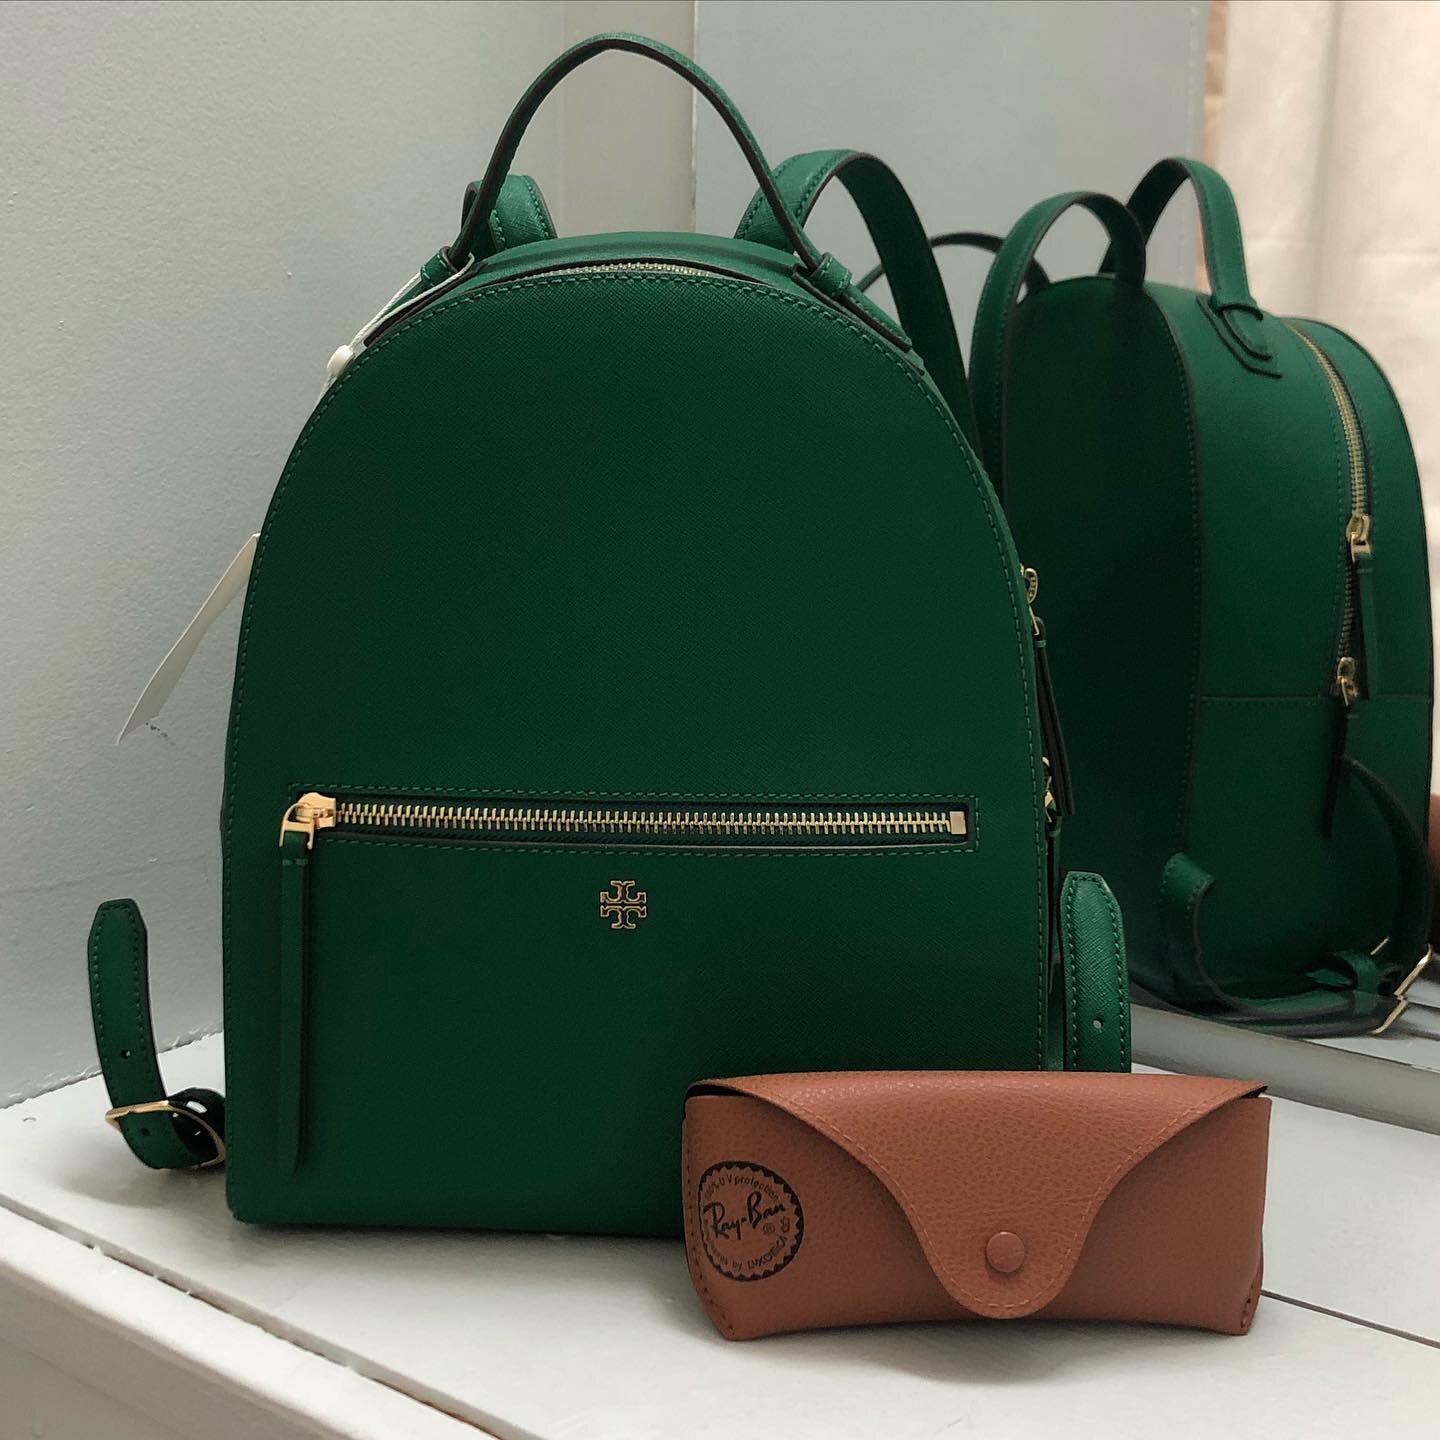 🌳 This Tory Burch back pack would make a great addition to a new spring outfit! Not to mention these adorable Ray Bans we just got in!! 😎 

#mankato #shoplocal #raybans #toryburch #backpack #accessorize #style #southernminnesota #womanownedbusiness